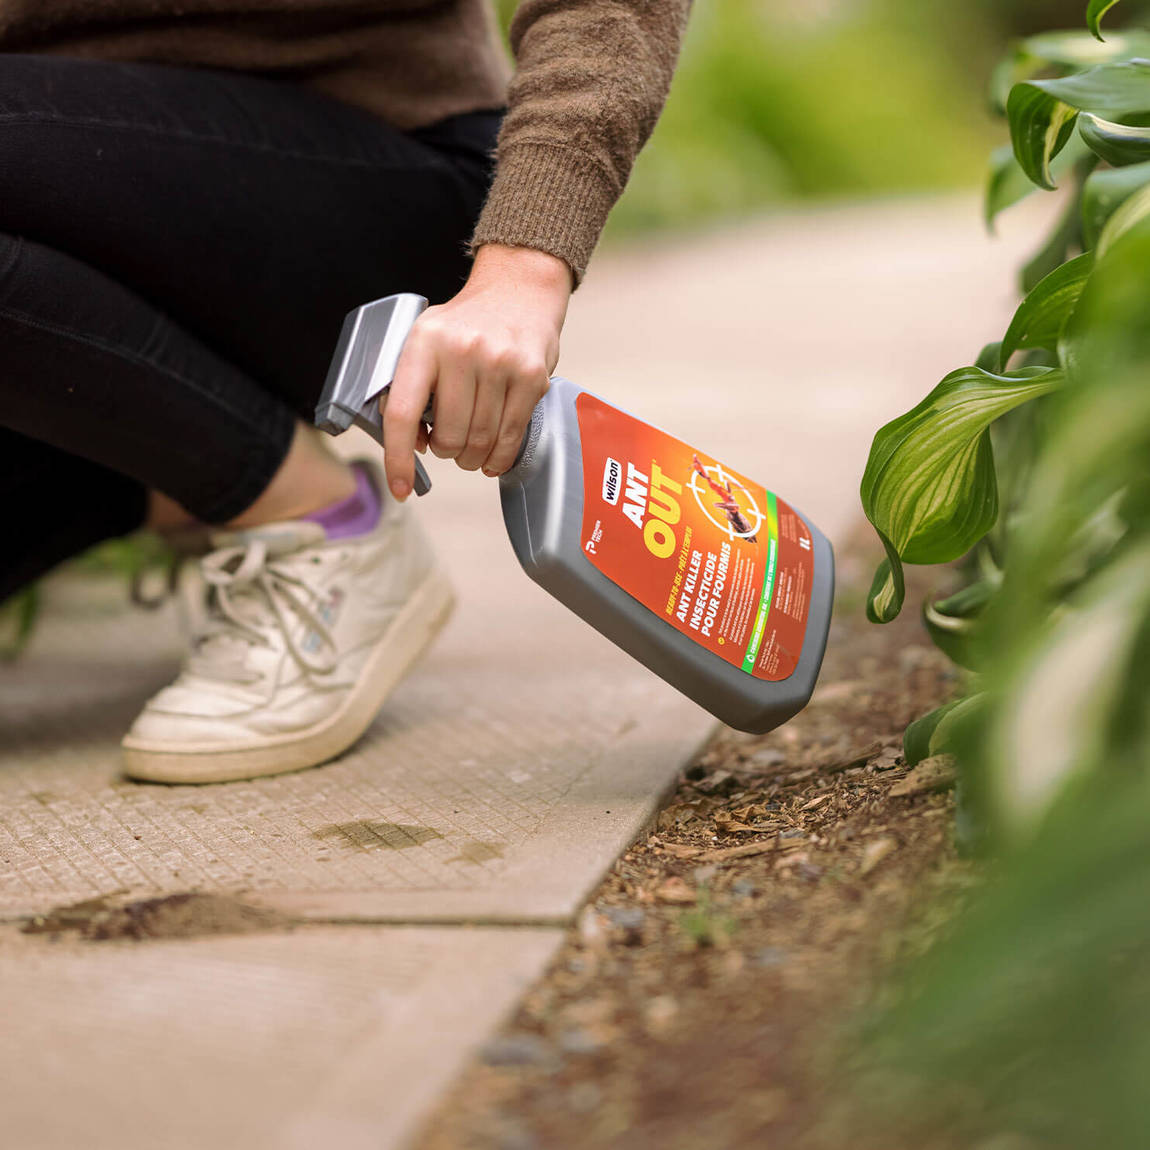 Get Rid Of Ant Invasions Easily For Up To 3 Months With Wilson Control Gel